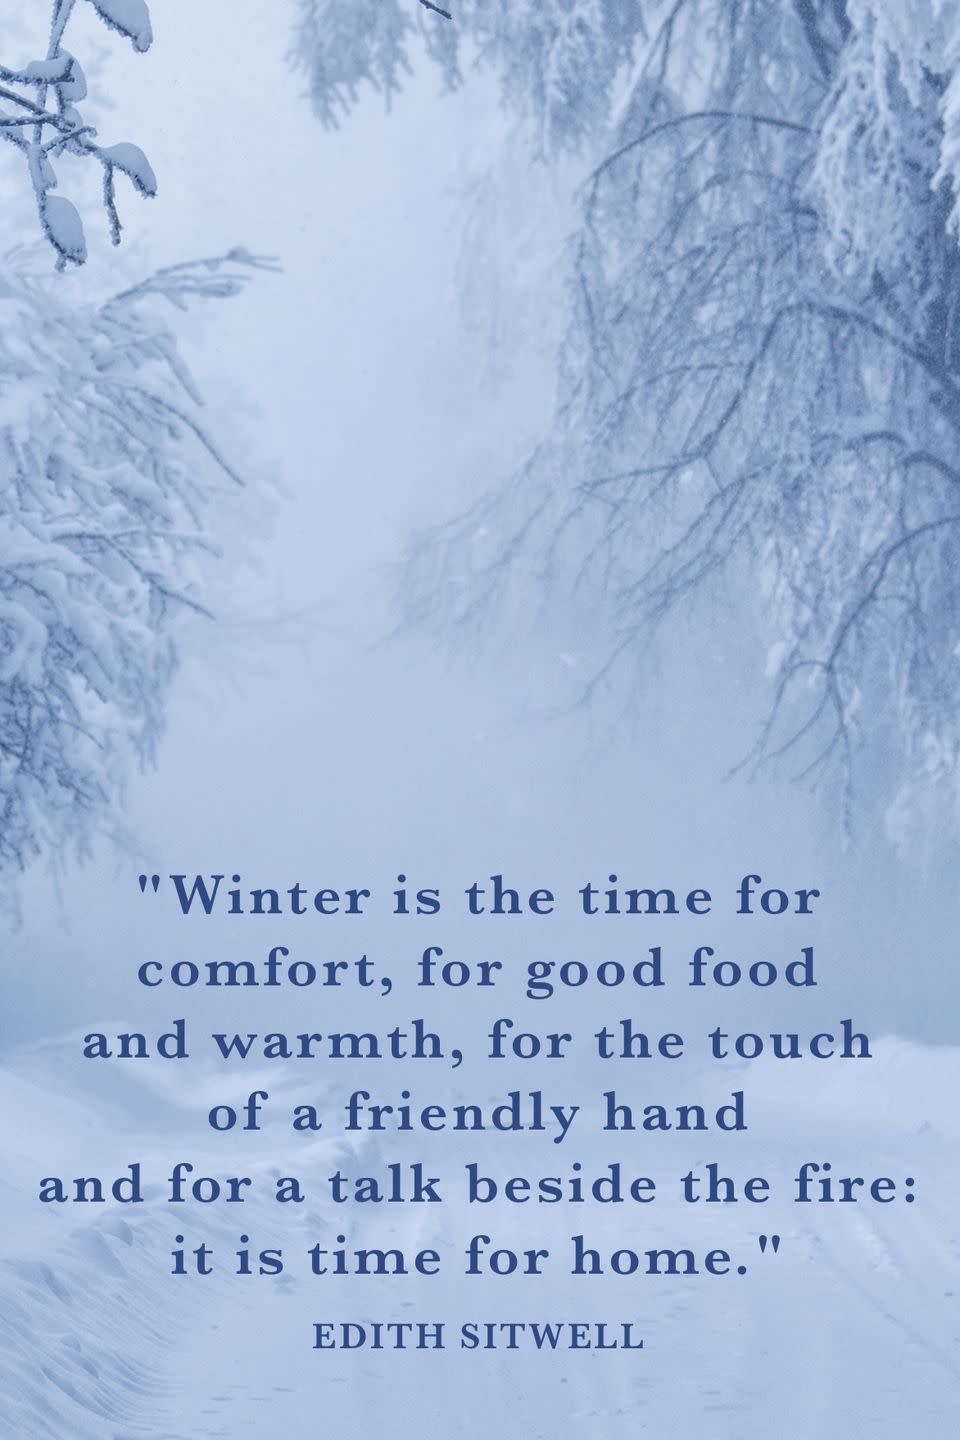 <p>"Winter is the time for comfort, for good food and warmth, for the touch of a friendly hand and for a talk beside the fire: it is time for home."</p>